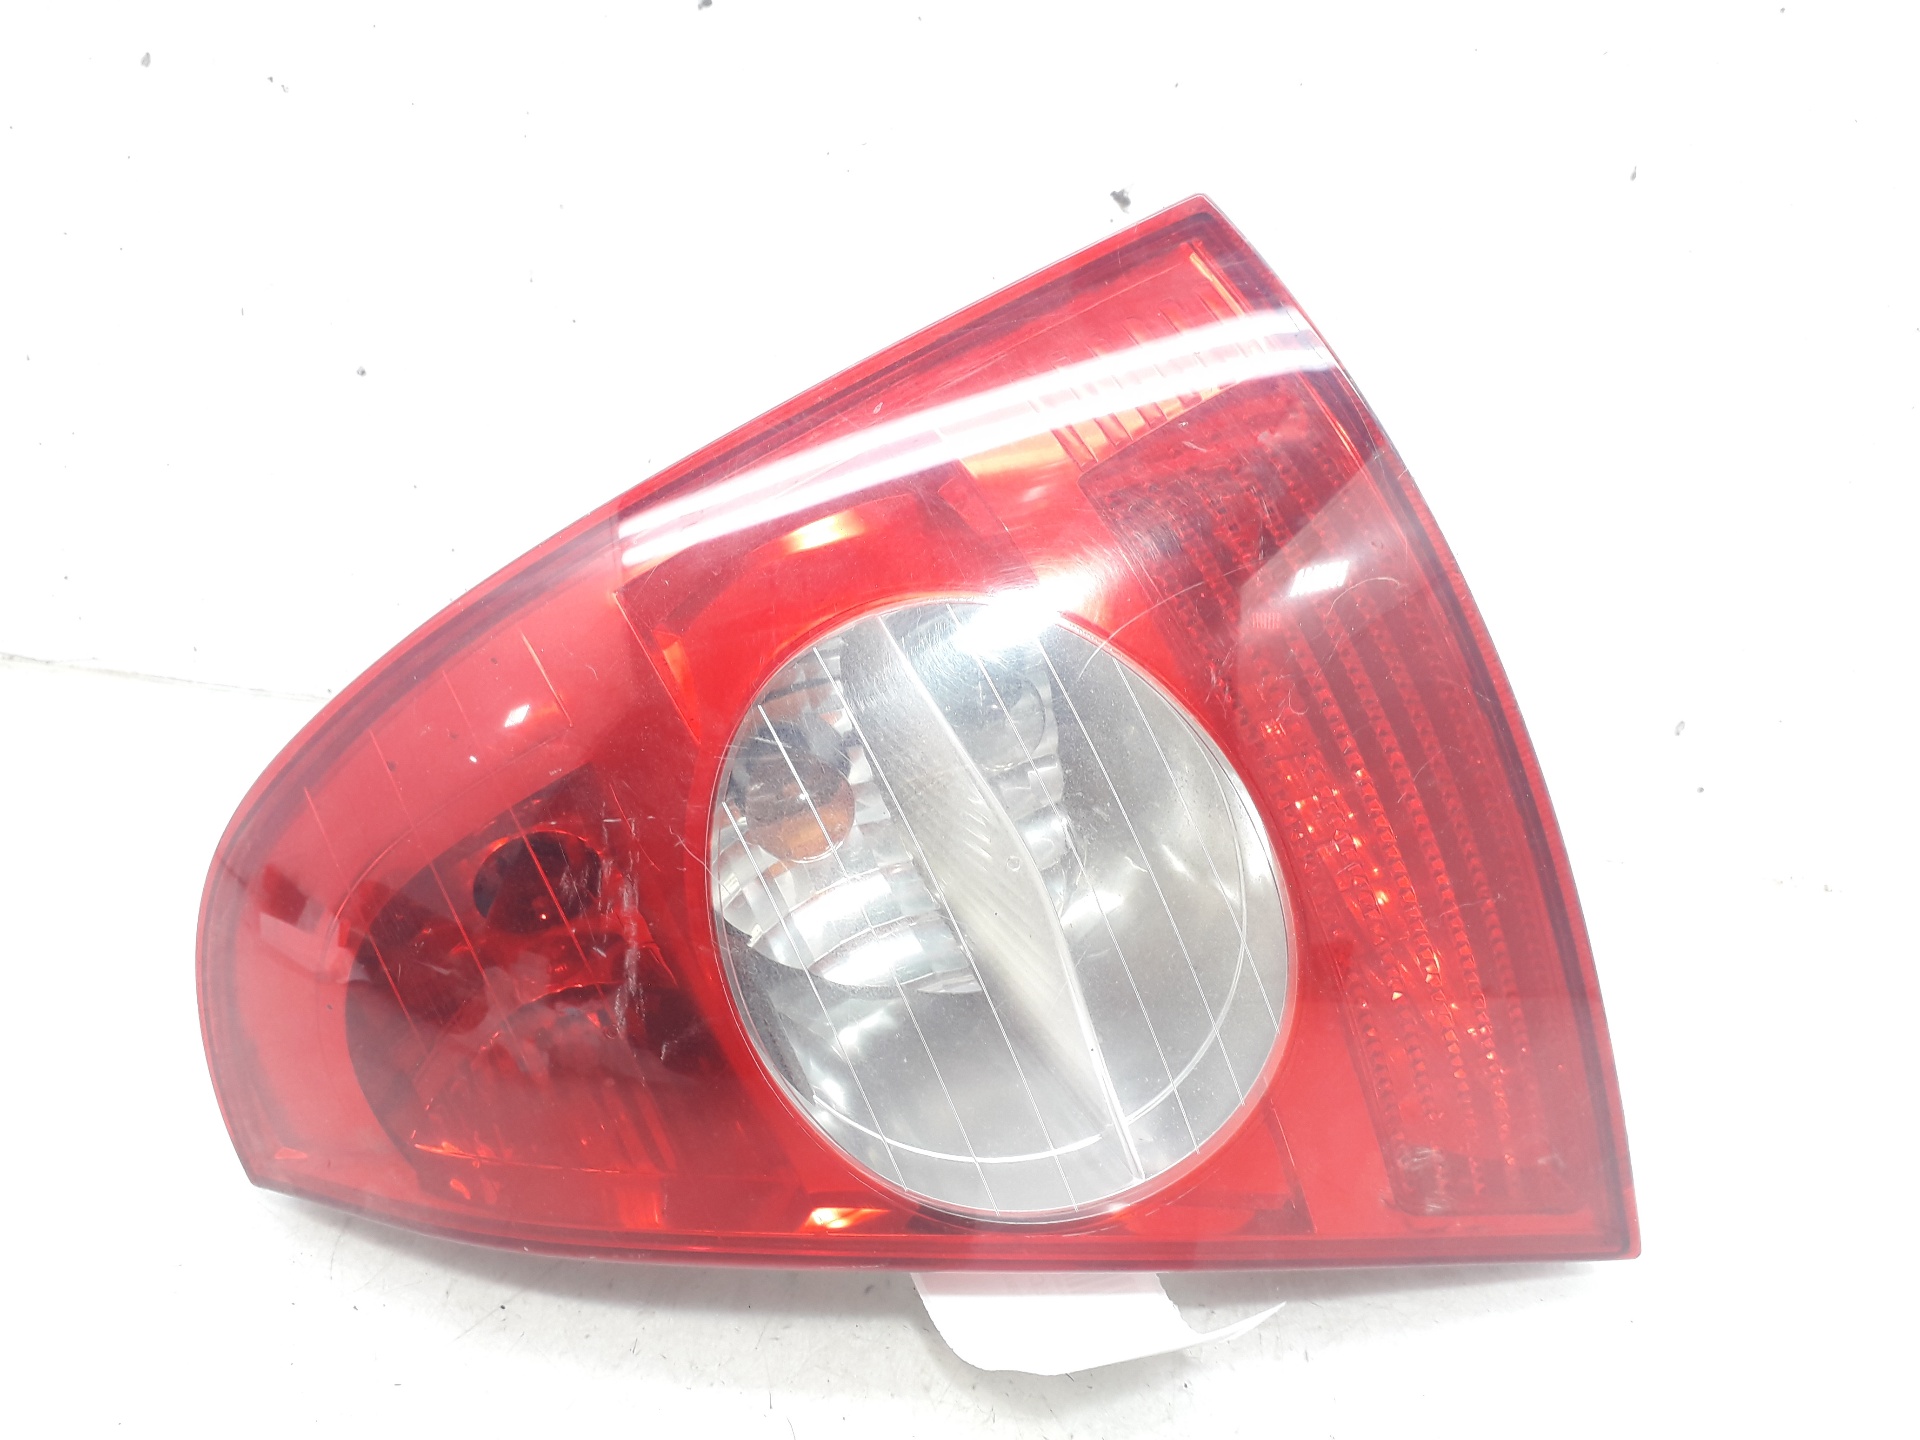 RENAULT Clio 3 generation (2005-2012) Rear Right Taillight Lamp 8200917487 22438473